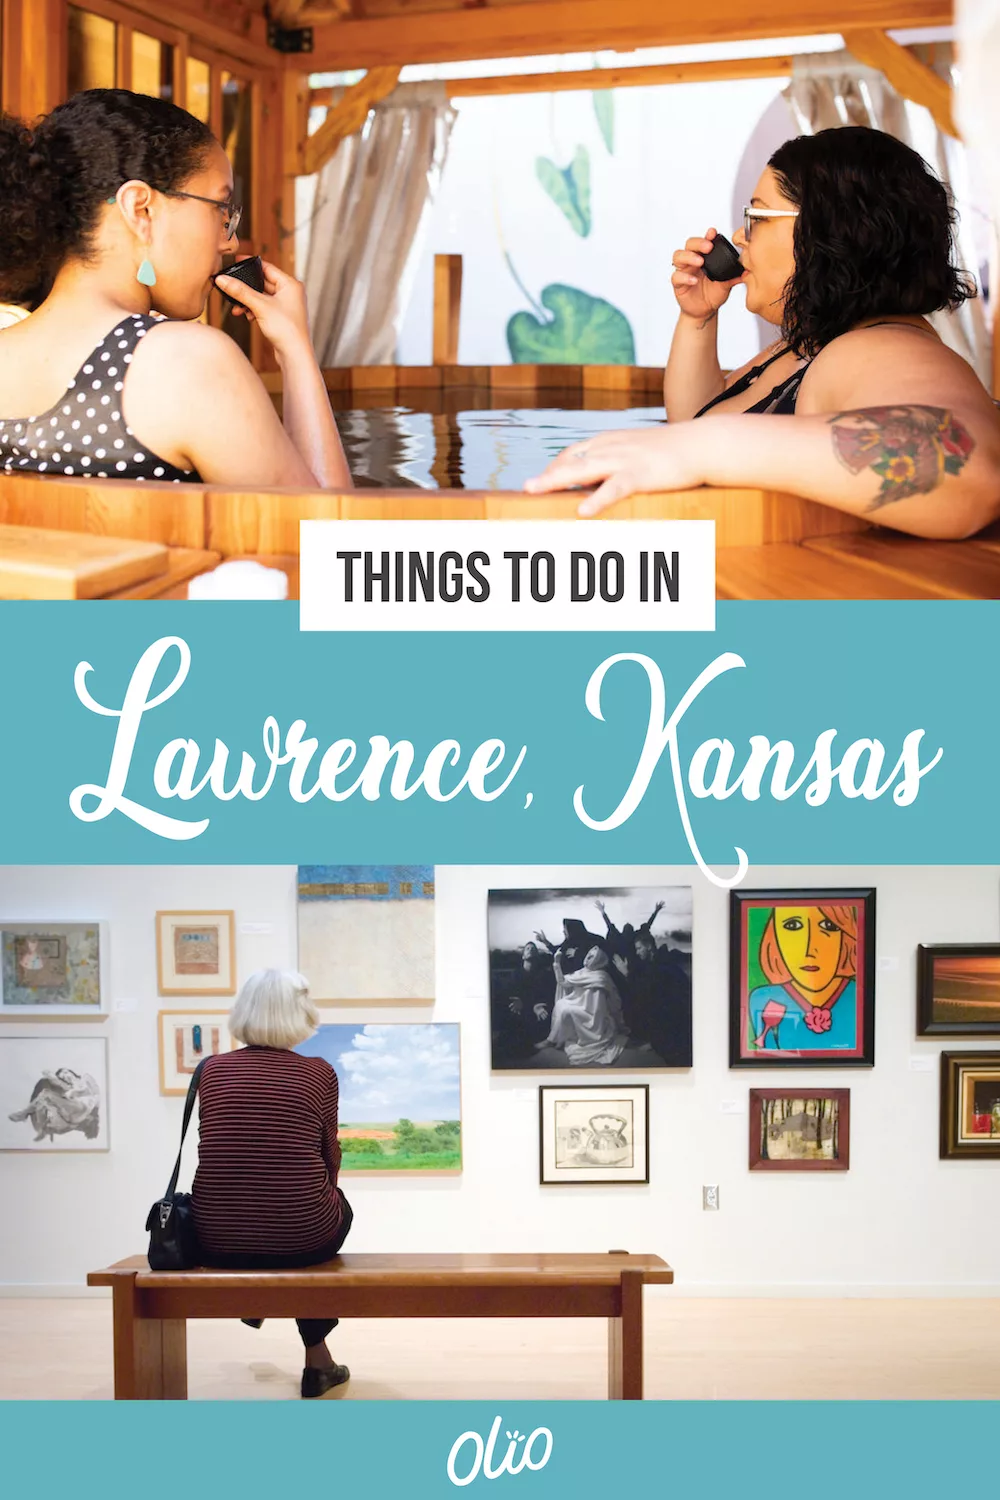 From incredible eateries and history-making breweries to a vibrant arts and culture scene, there are lots of reasons to fall in love with Lawrence, Kansas. Plan a weekend getaway to learn why Lawrence is more than your typical college town. #Kansas #Lawrence #Midwest #MidwestTravel